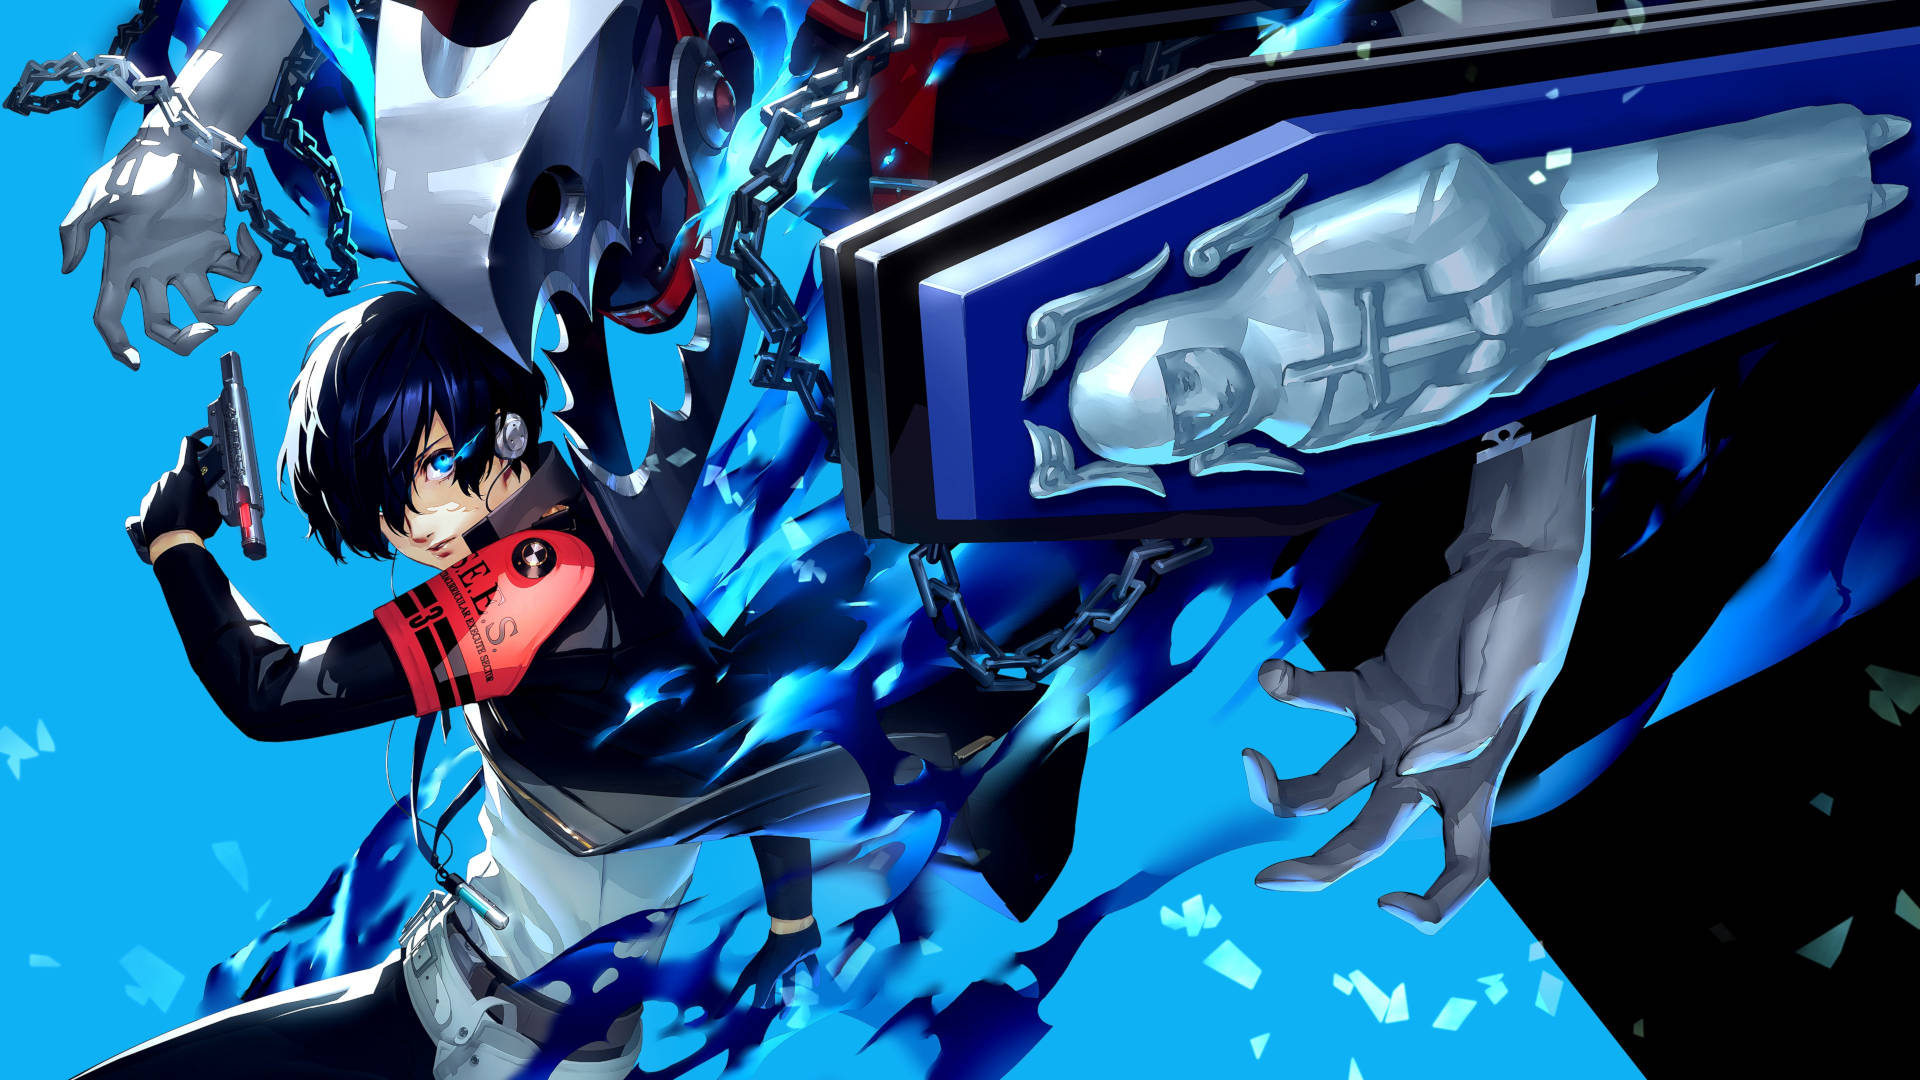 Persona 3 Reload release date, trailers, and gameplay